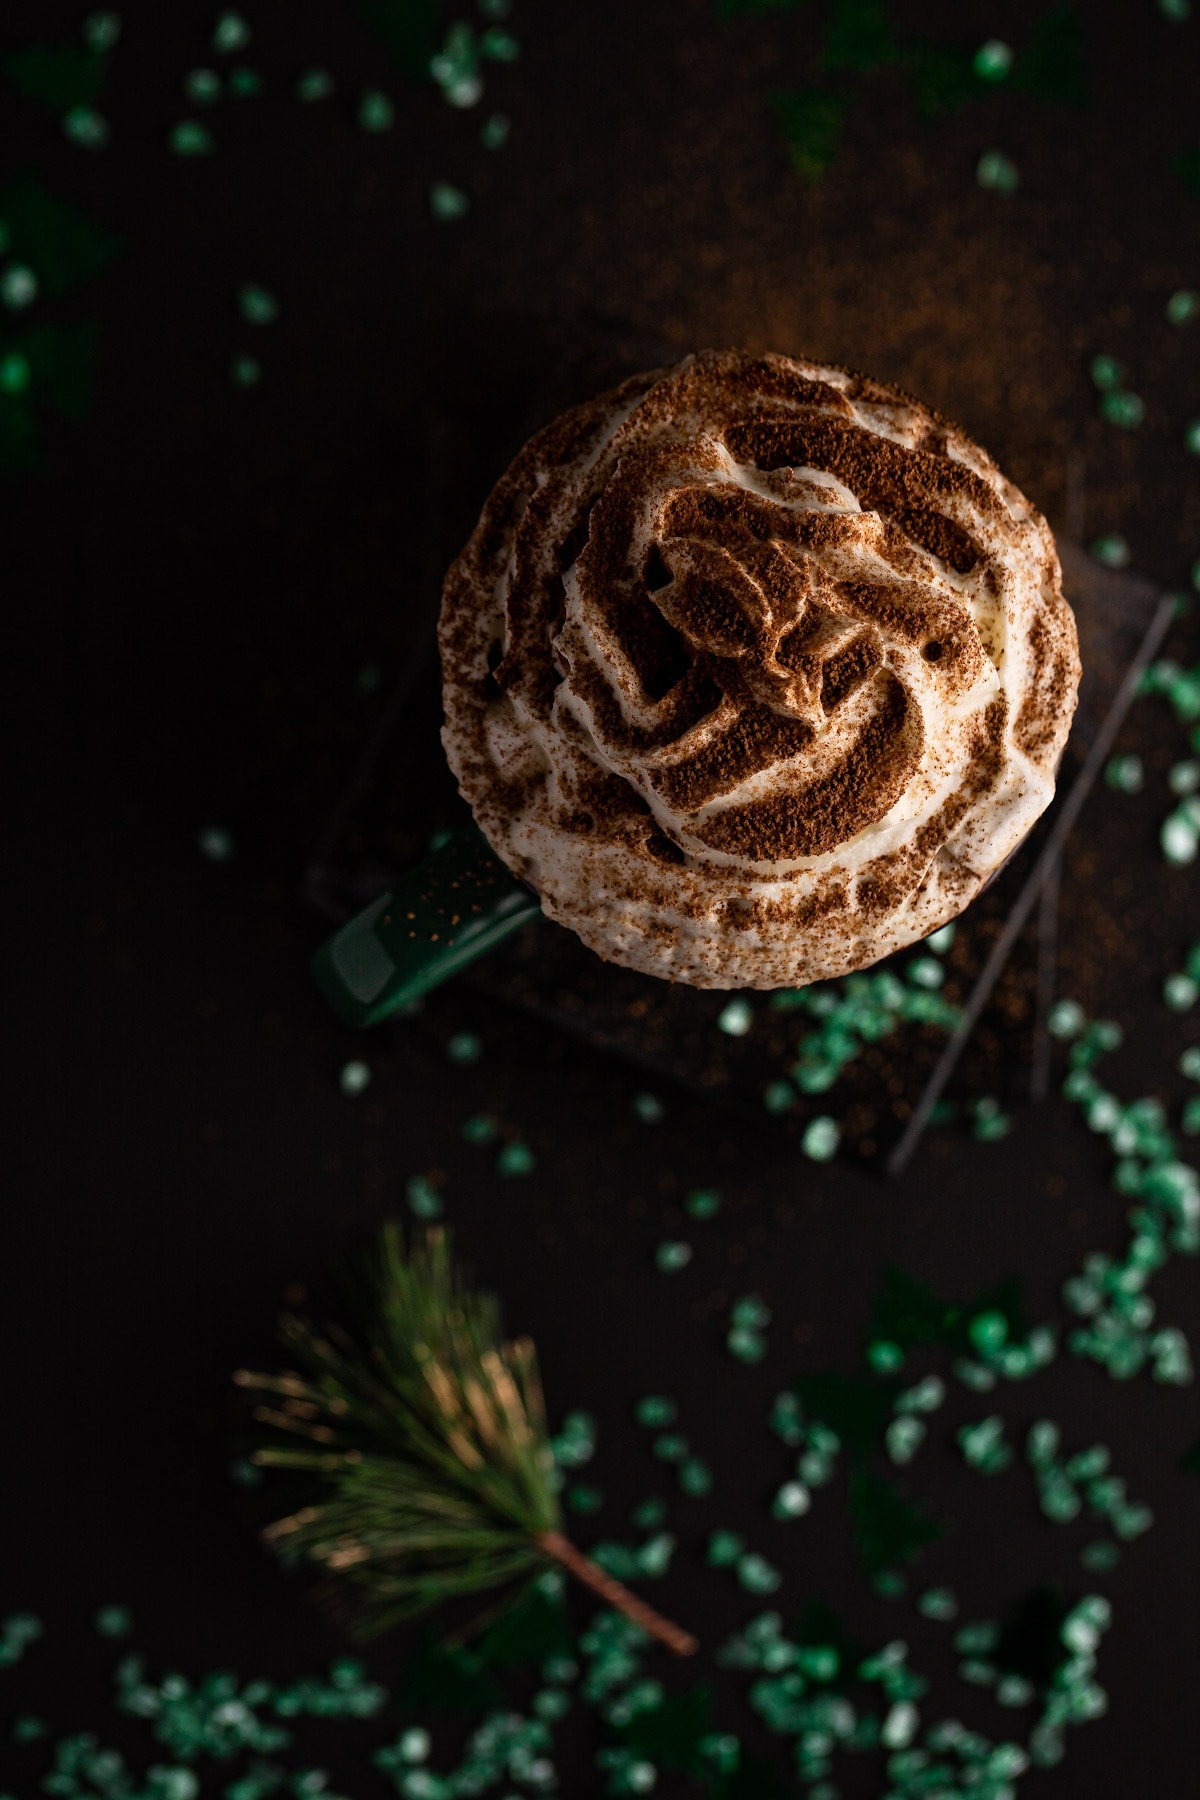 Overhead view of hot chocolate topped with whipped cream and sprinkled cocoa powder, on a black background with green sparkles.